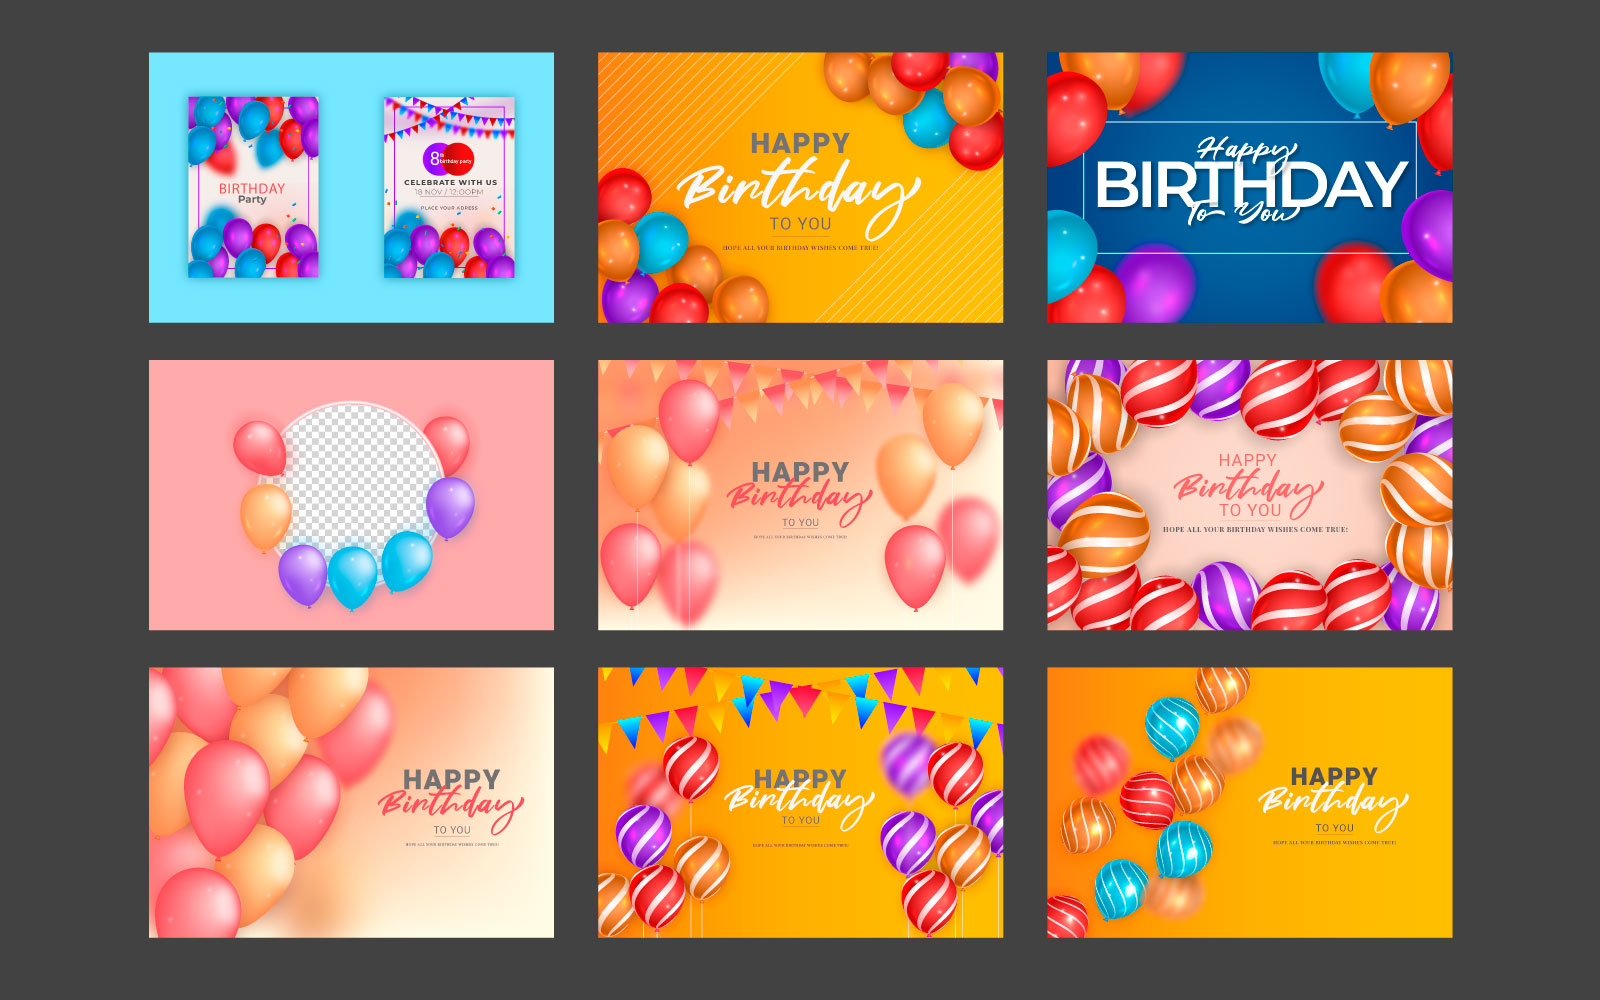 Birthday vector banner template set. Happy birthday to you text in white space